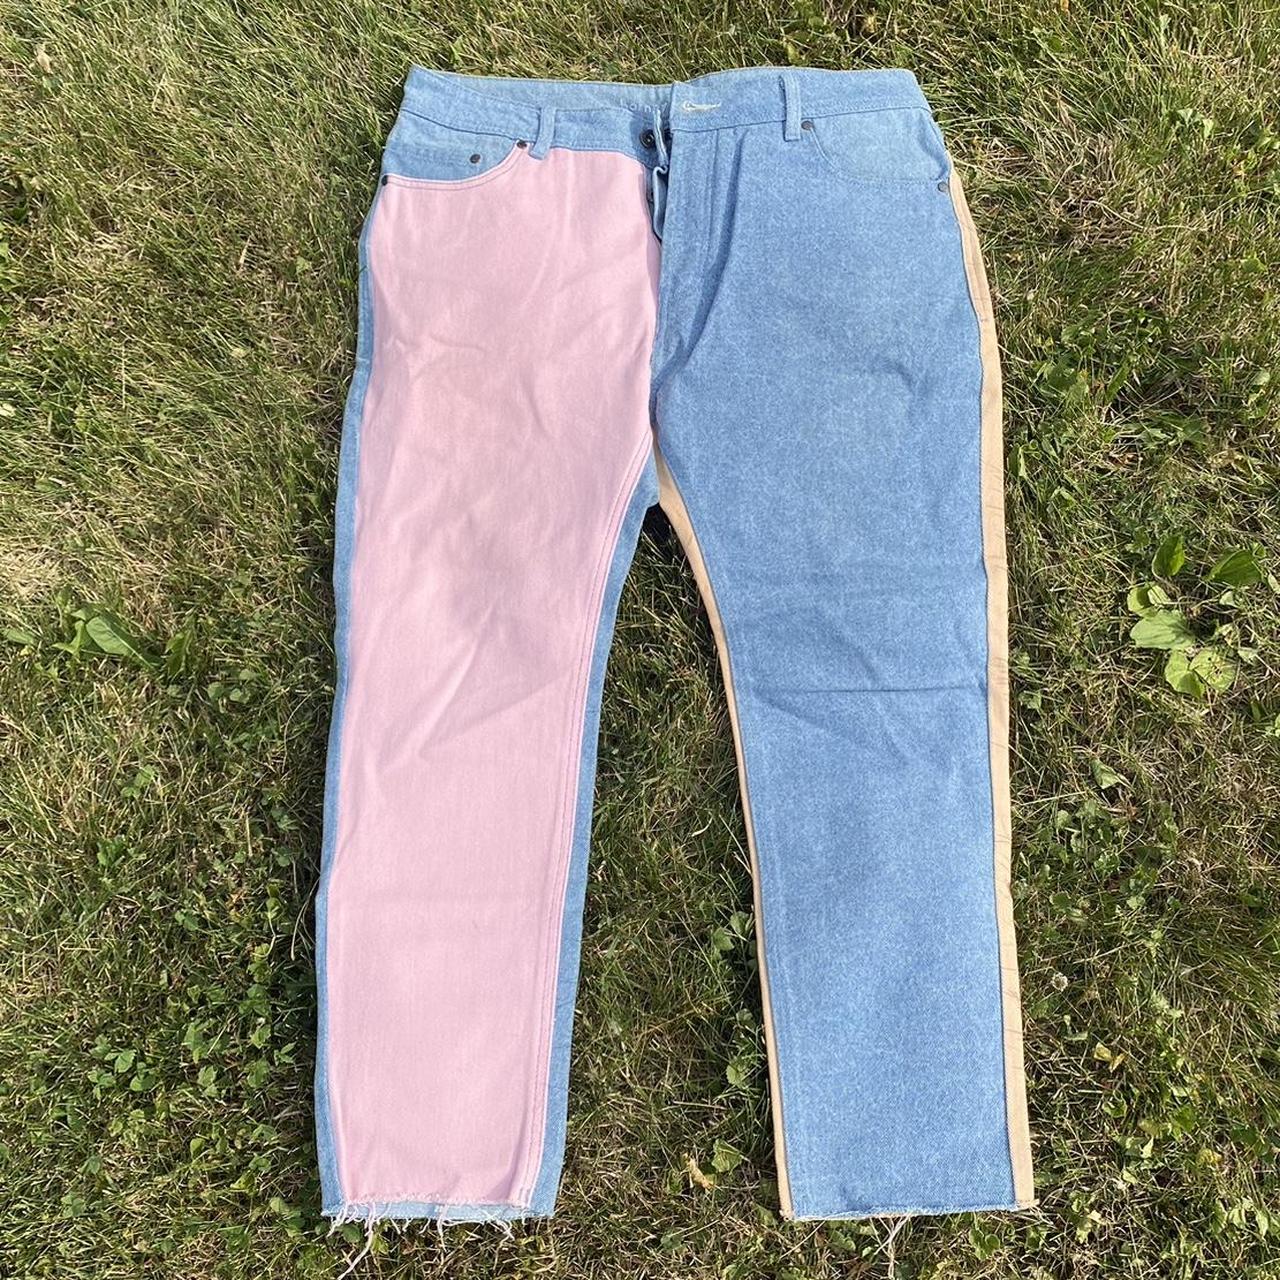 Barney Cools Men's Yellow and Pink Jeans